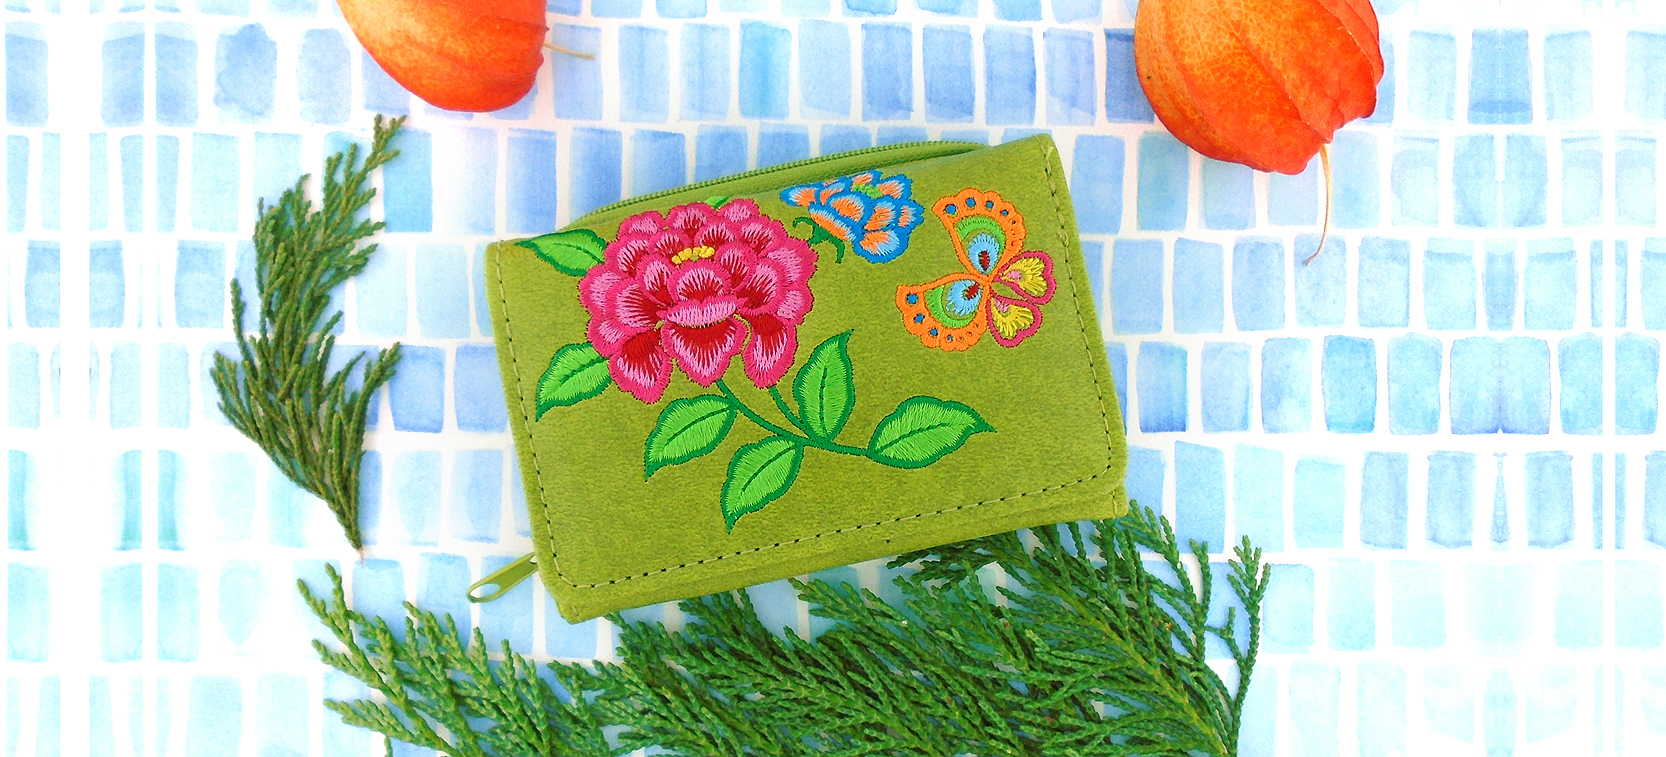 LAVISHY design and wholesale vegan embroidered small wallets to gift shops, boutiques and book stores in Canada, USA and worldwide.